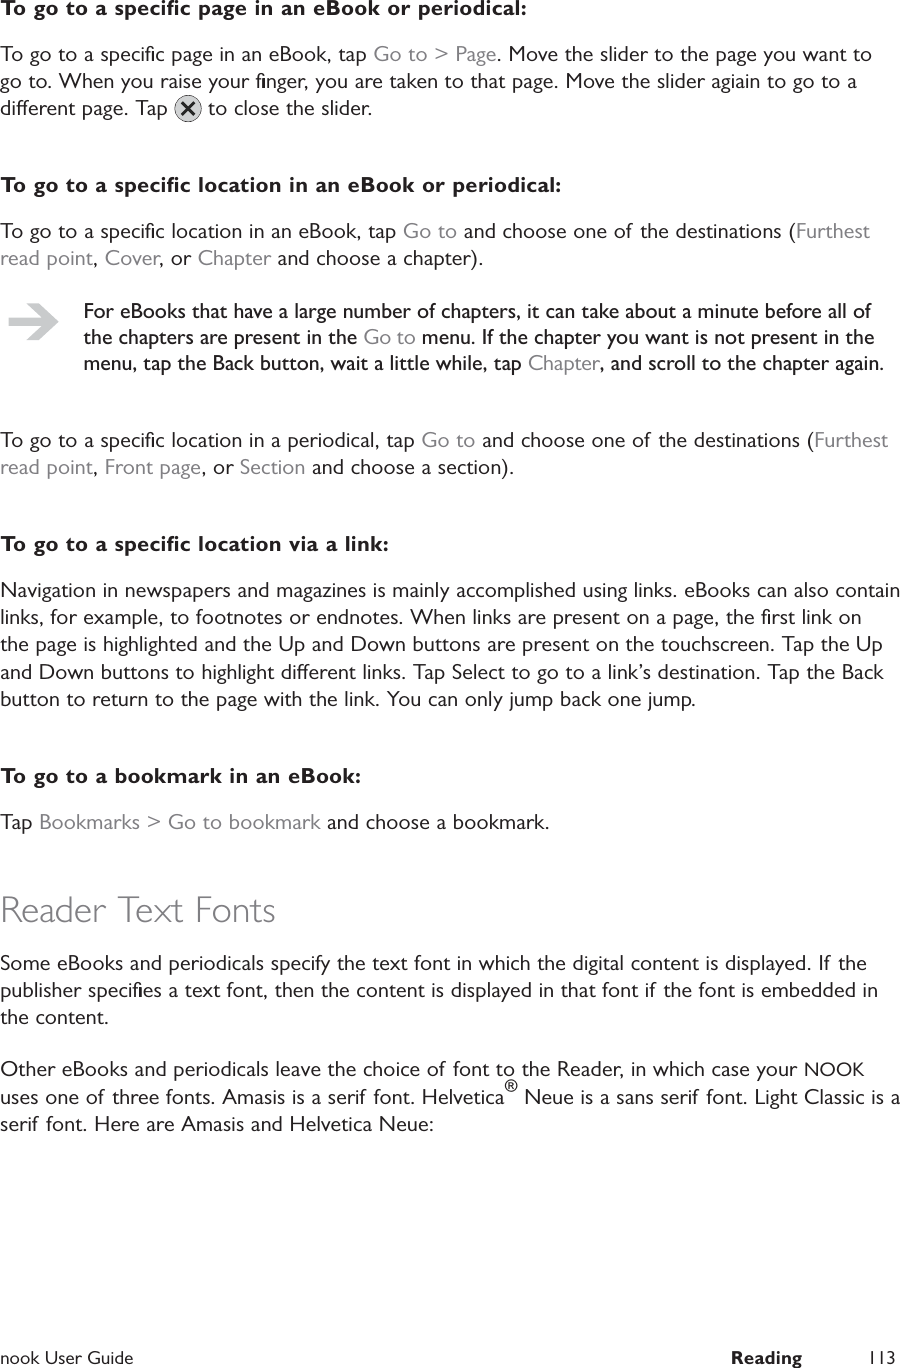  nook User Guide  Reading 113To go to a speciﬁc page in an eBook or periodical:To go to a speciﬁc page in an eBook, tap Go to &gt; Page. Move the slider to the page you want to go to. When you raise your ﬁnger, you are taken to that page. Move the slider agiain to go to a dierent page. Tap   to close the slider.To go to a speciﬁc location in an eBook or periodical:To go to a speciﬁc location in an eBook, tap Go to and choose one of the destinations (Furthest read point, Cover, or Chapter and choose a chapter).For eBooks that have a large number of chapters, it can take about a minute before all of the chapters are present in the Go to menu. If the chapter you want is not present in the menu, tap the Back button, wait a little while, tap Chapter, and scroll to the chapter again.To go to a speciﬁc location in a periodical, tap Go to and choose one of the destinations (Furthest read point, Front page, or Section and choose a section).To go to a speciﬁc location via a link:Navigation in newspapers and magazines is mainly accomplished using links. eBooks can also contain links, for example, to footnotes or endnotes. When links are present on a page, the ﬁrst link on the page is highlighted and the Up and Down buttons are present on the touchscreen. Tap the Up and Down buttons to highlight dierent links. Tap Select to go to a link’s destination. Tap the Back button to return to the page with the link. You can only jump back one jump.To go to a bookmark in an eBook:Tap Bookmarks &gt; Go to bookmark and choose a bookmark.Reader Text FontsSome eBooks and periodicals specify the text font in which the digital content is displayed. If the publisher speciﬁes a text font, then the content is displayed in that font if the font is embedded in the content.Other eBooks and periodicals leave the choice of font to the Reader, in which case your NOOK uses one of three fonts. Amasis is a serif font. Helvetica® Neue is a sans serif font. Light Classic is a serif font. Here are Amasis and Helvetica Neue: